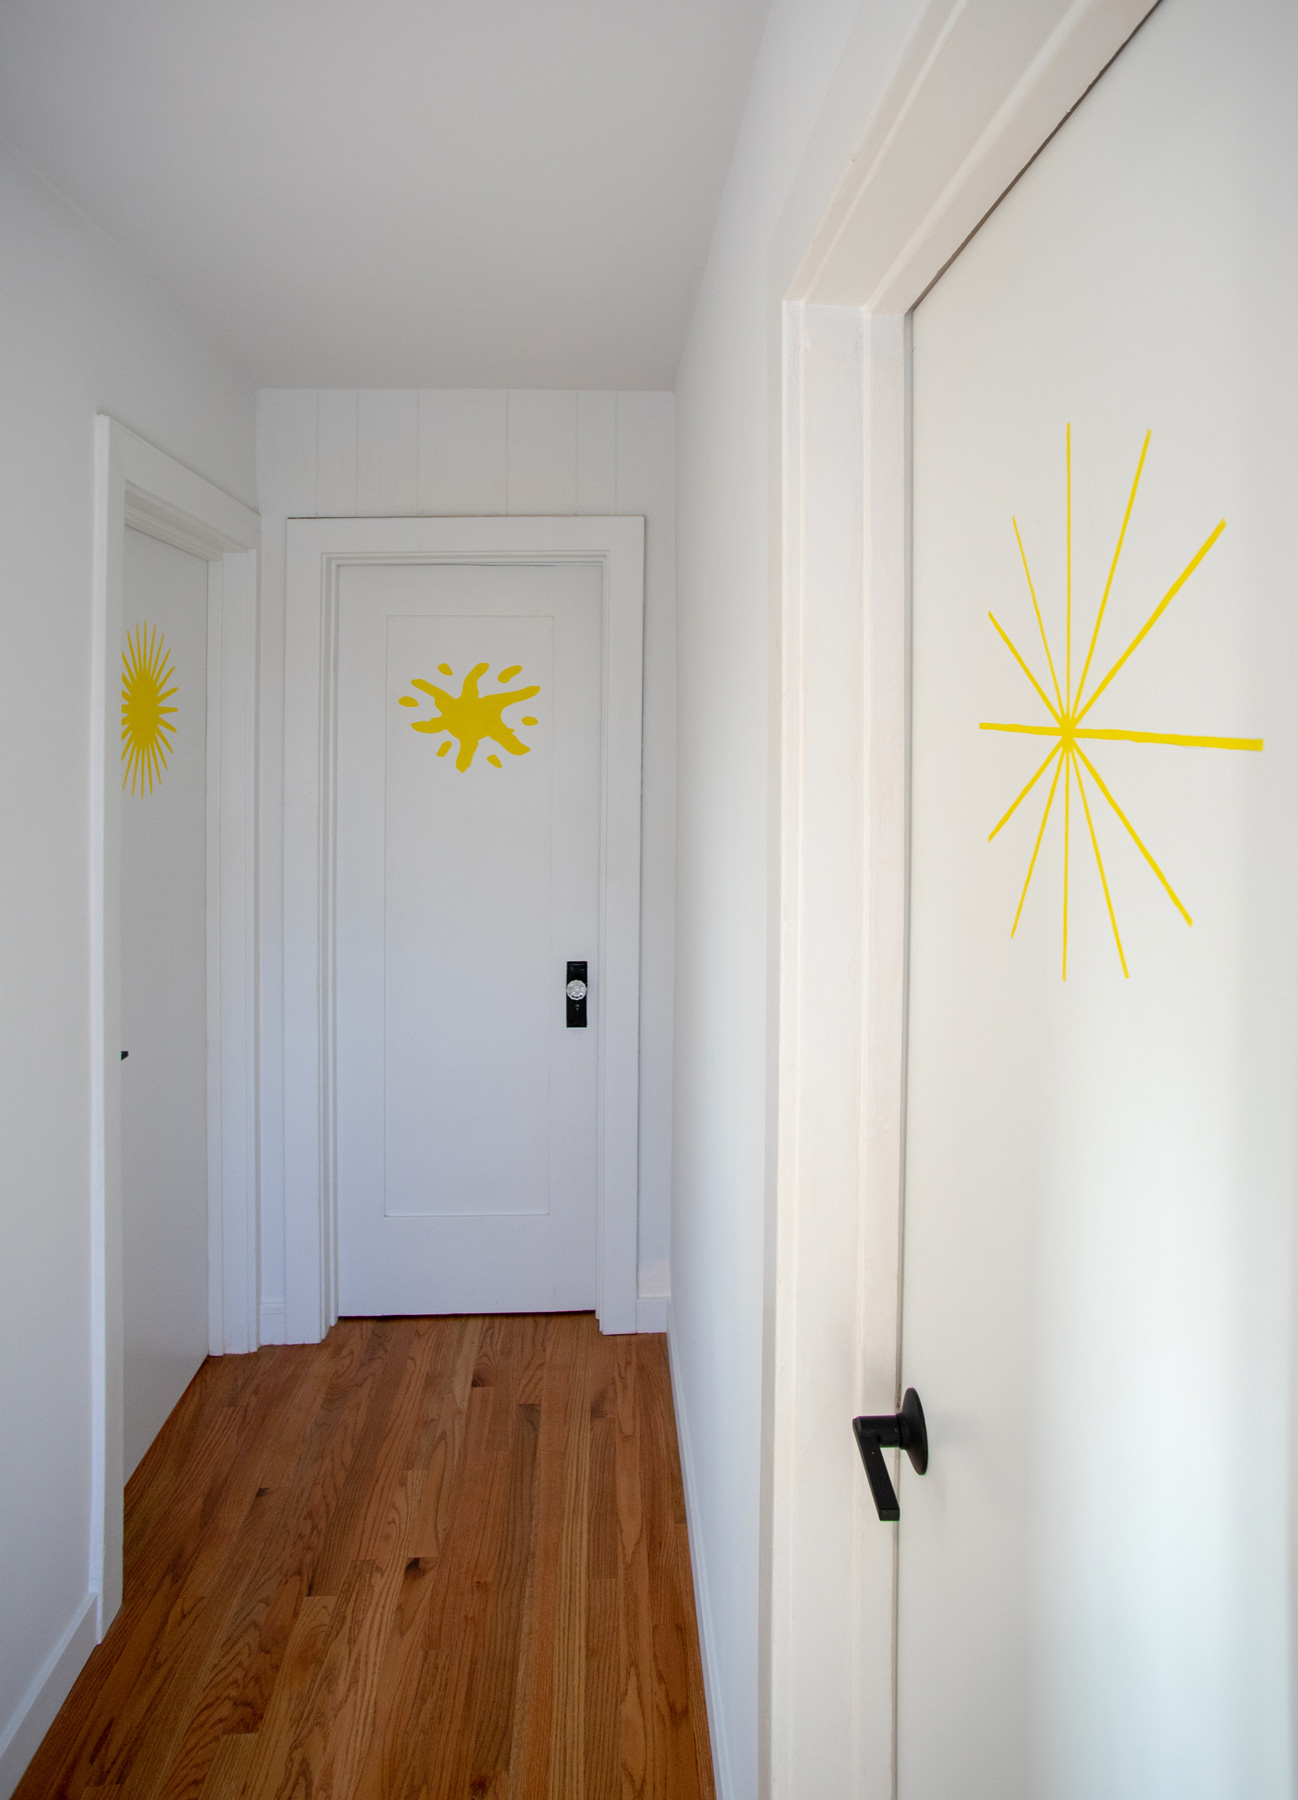 Let the Sun In (A Sun for Every Door), 2019